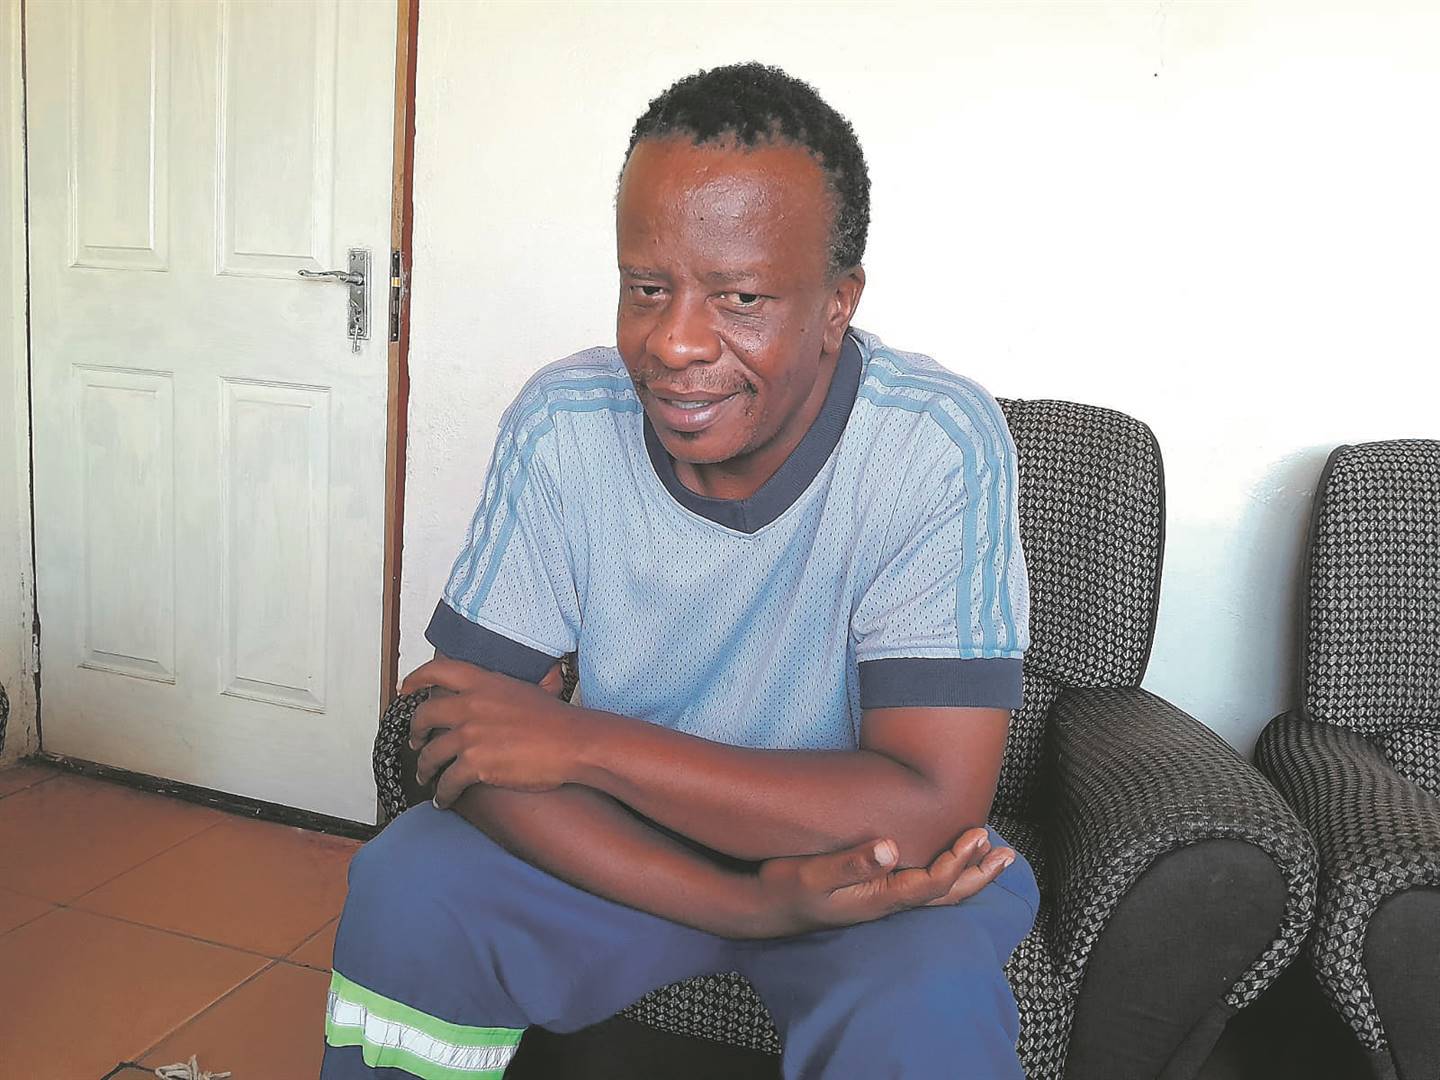 Makhetha Sebolai, whose family was wiped out during apartheid, is still battling to survive financially. 